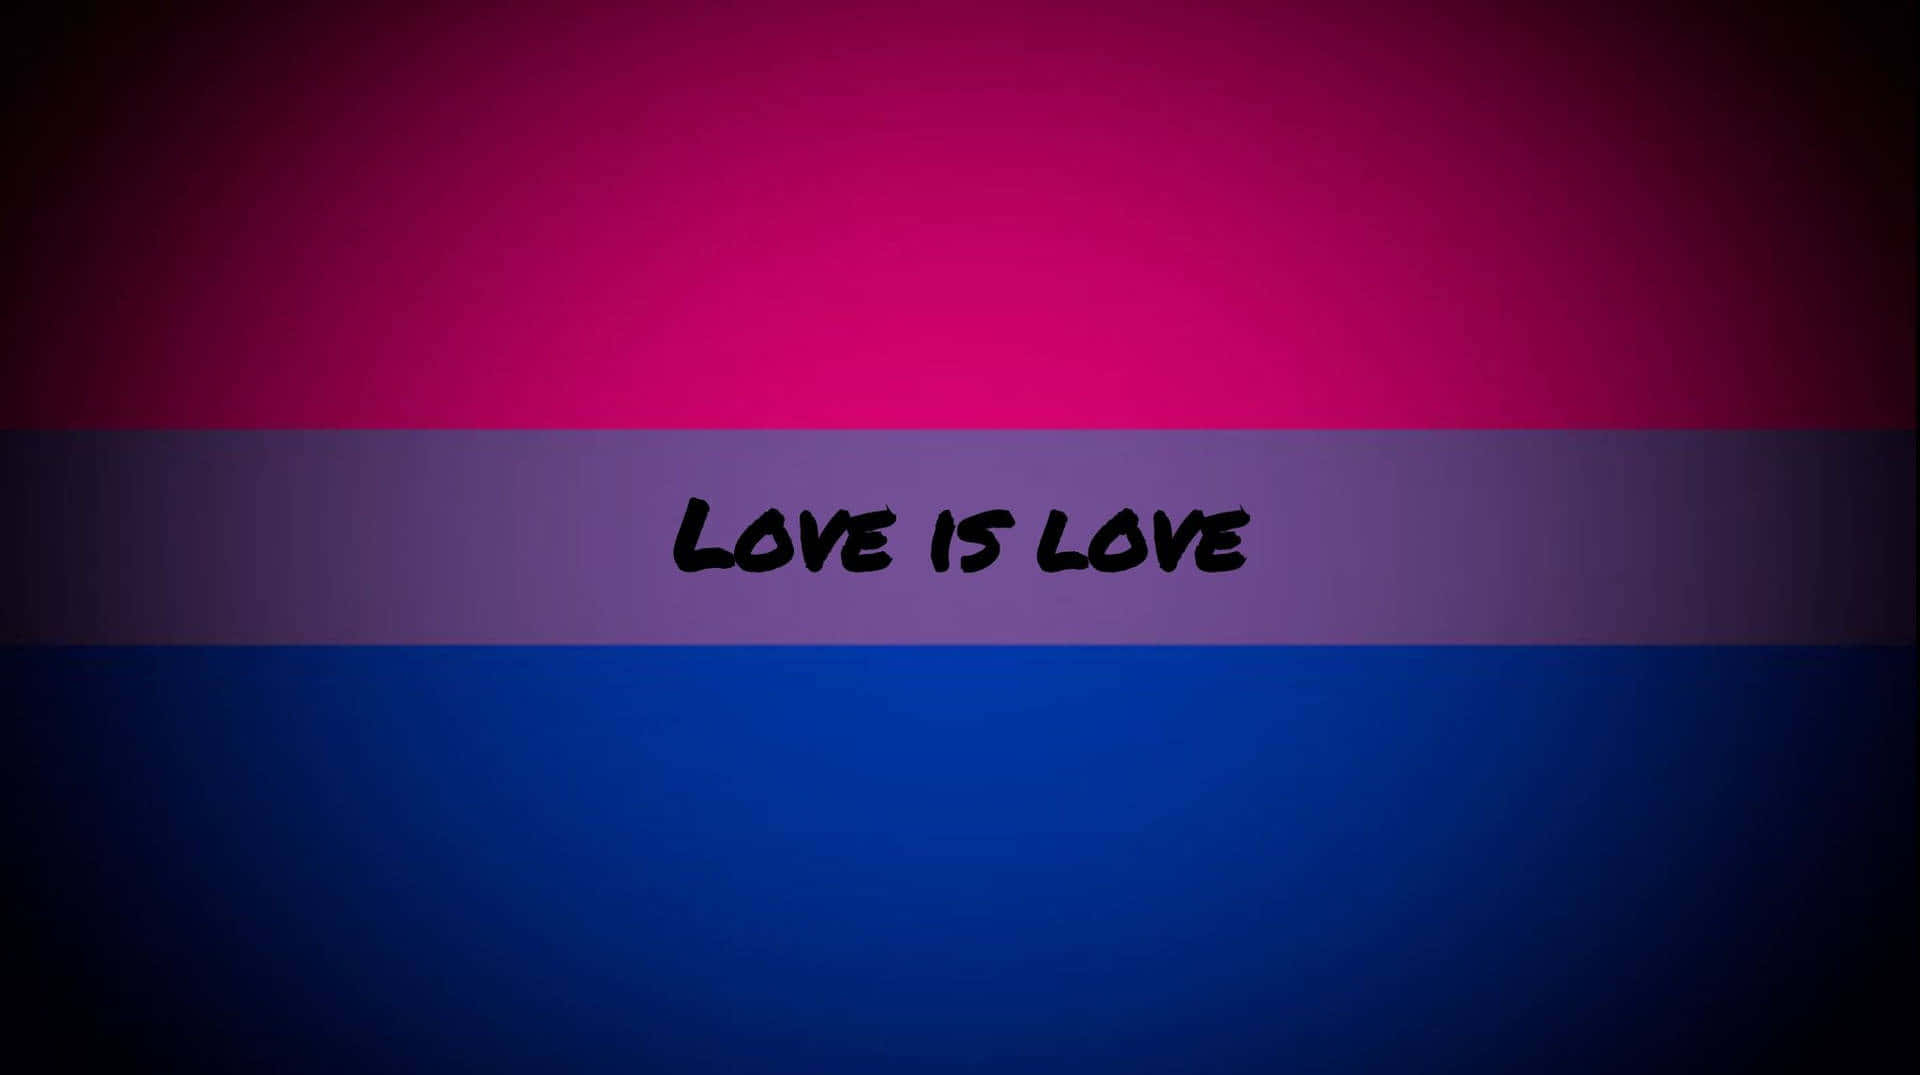 Love Is Love - A Pink And Blue Striped Background